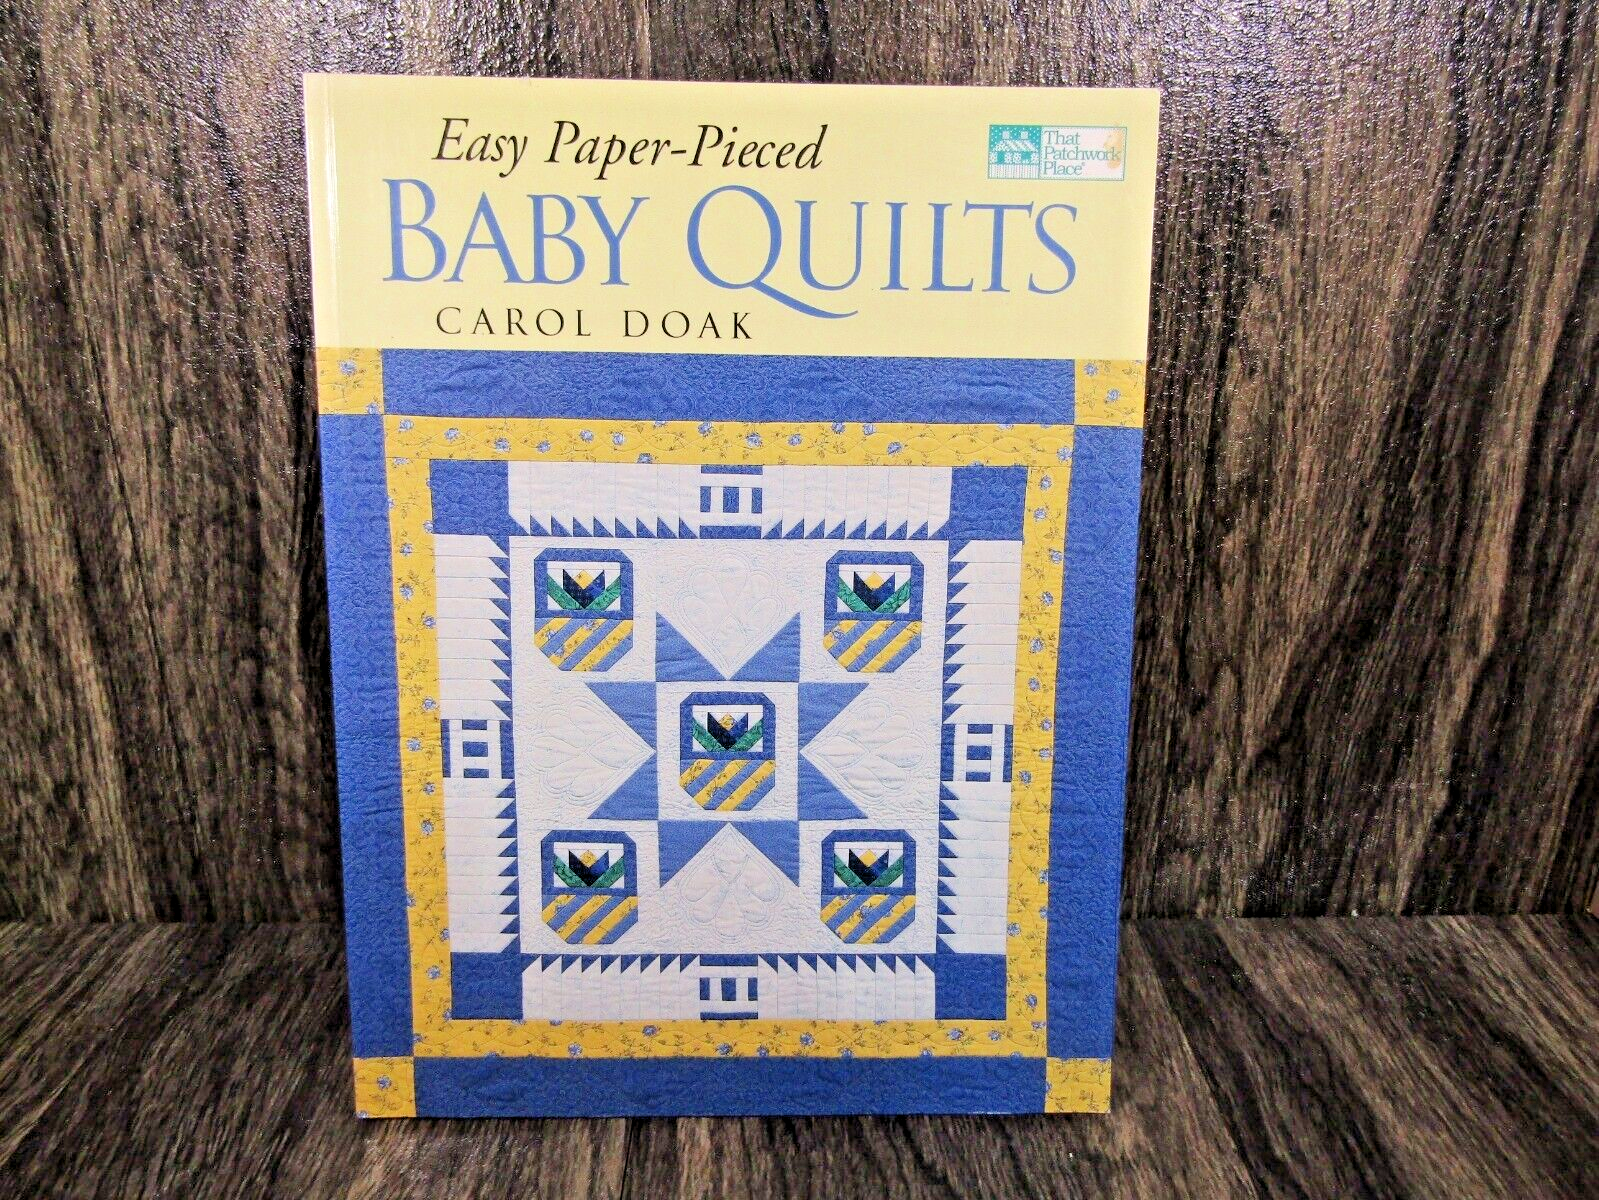 2001 That Patchwork Place Easy Paper Pierced Baby Quilts Book by Carol Doak - $22.76